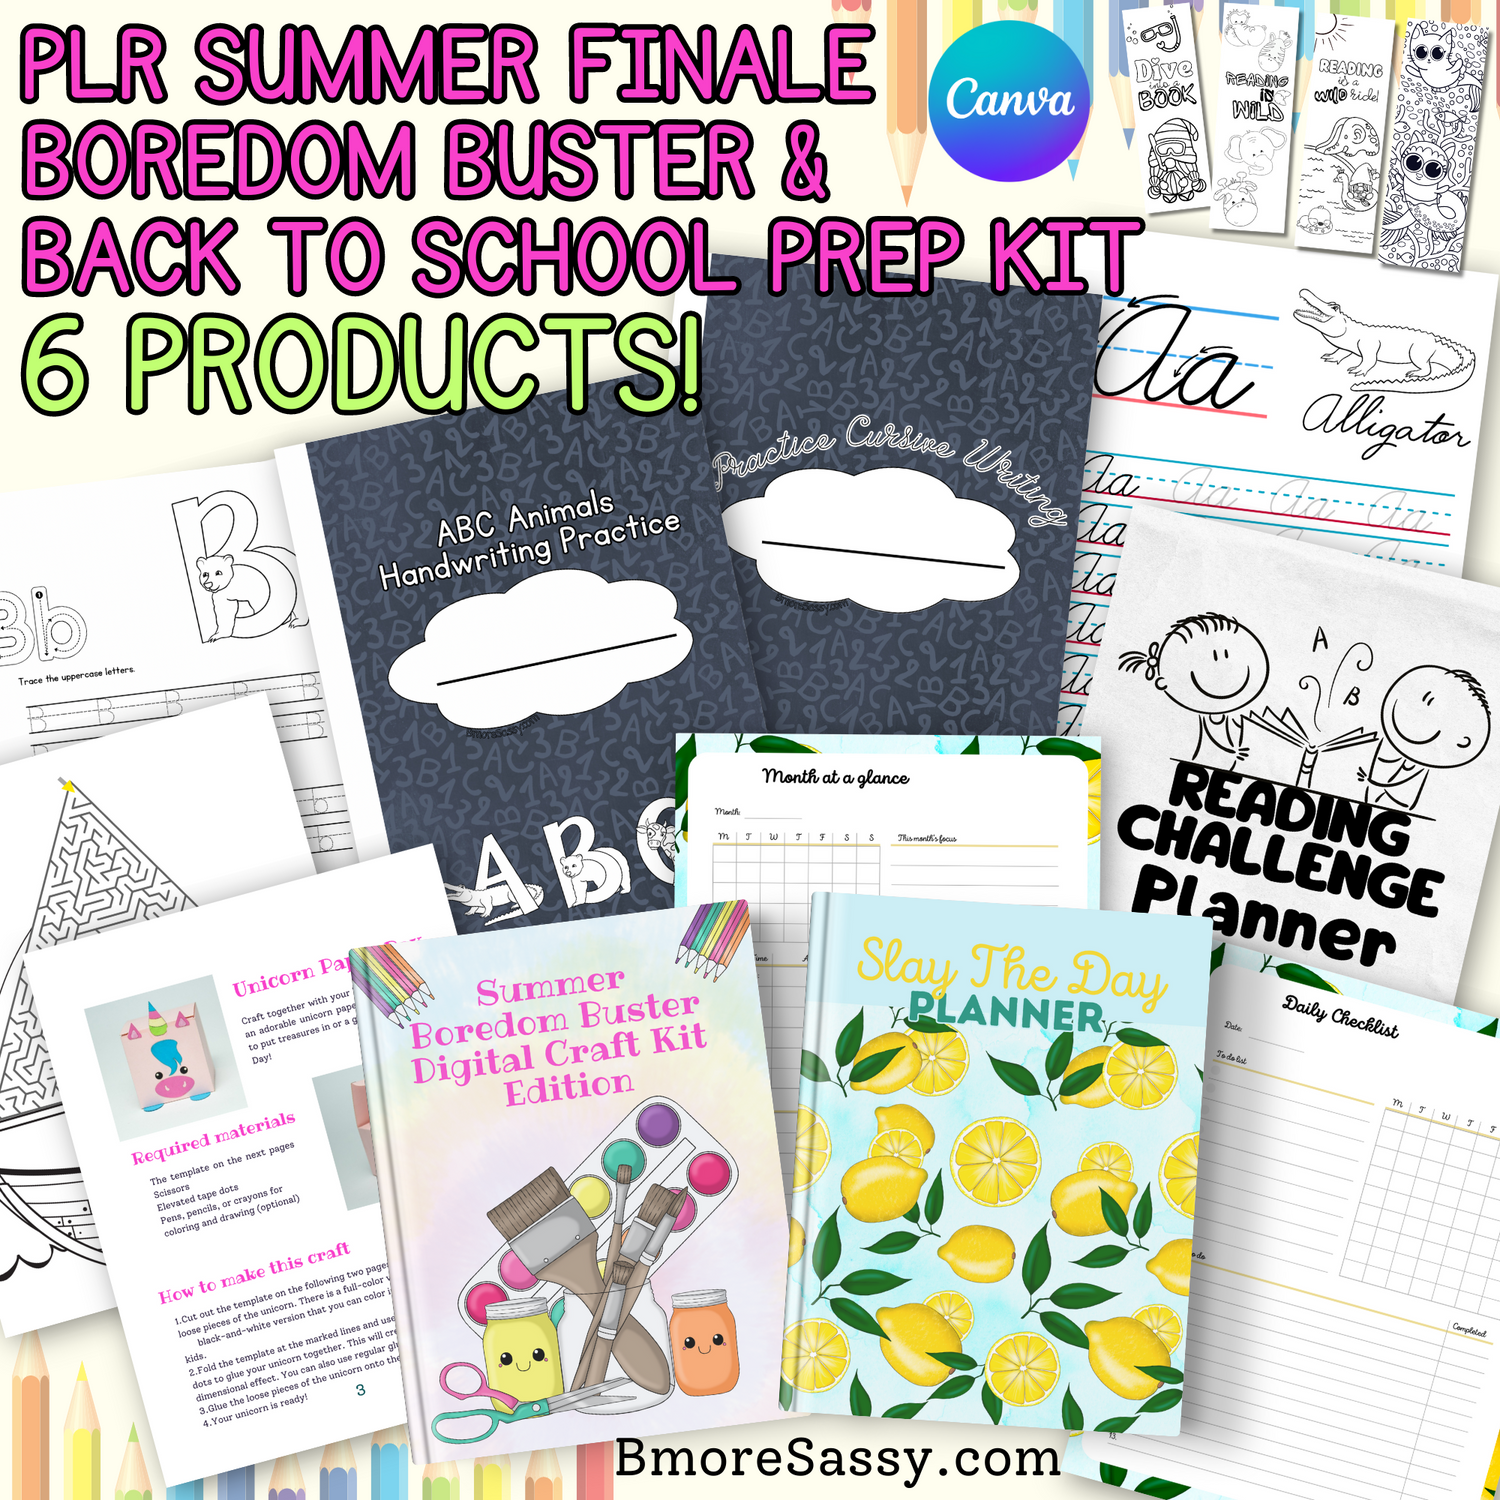 PLR Summer Finale Boredom Buster and Back to School Prep Kit promo graphic